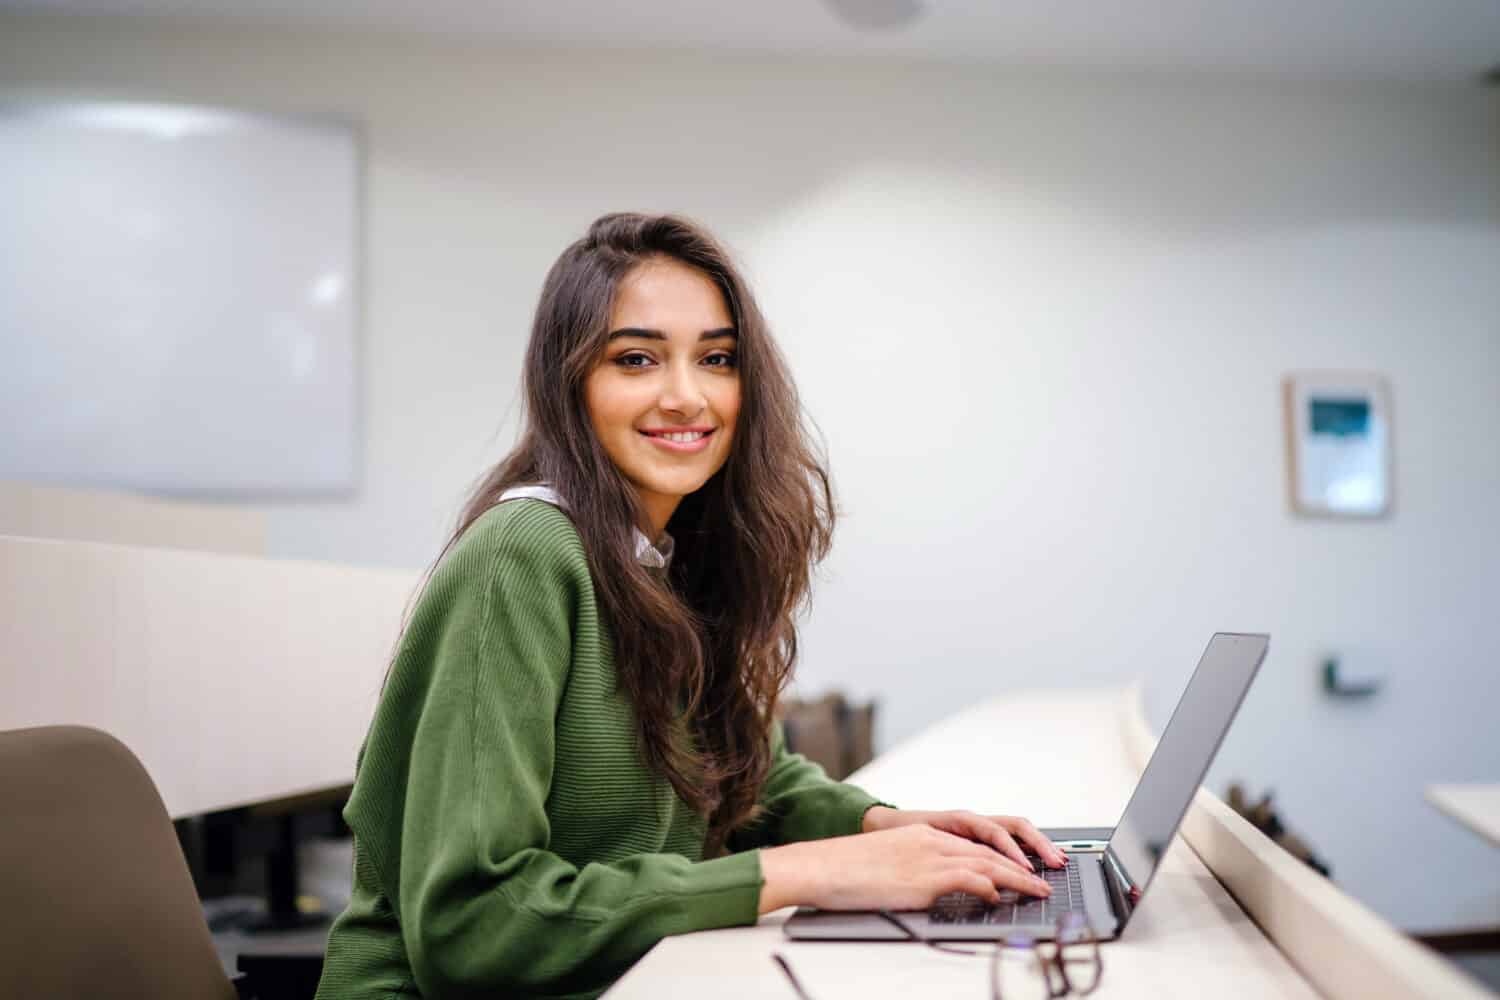 A university student looking at the camera smiling while working on her laptop.